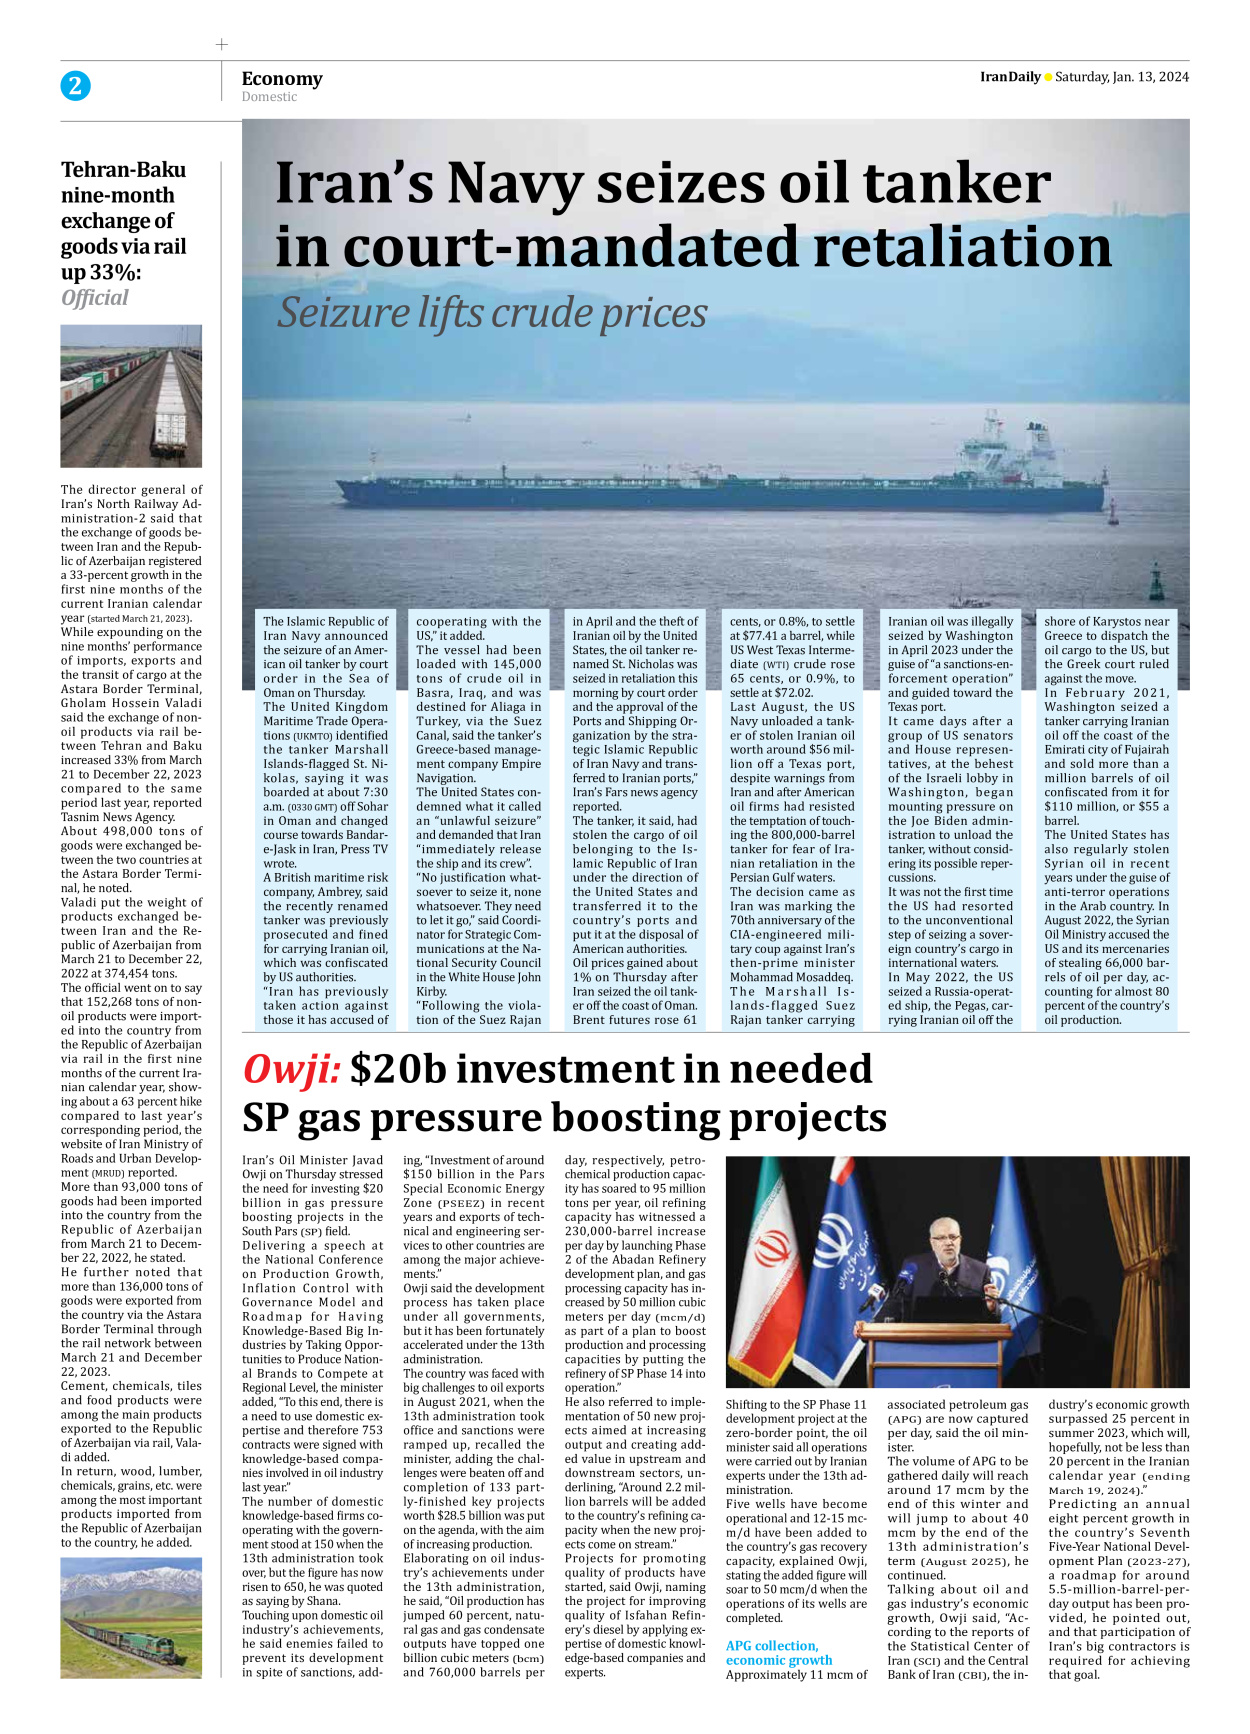 Iran Daily - Number Seven Thousand Four Hundred and Eighty Three - 13 January 2024 - Page 2